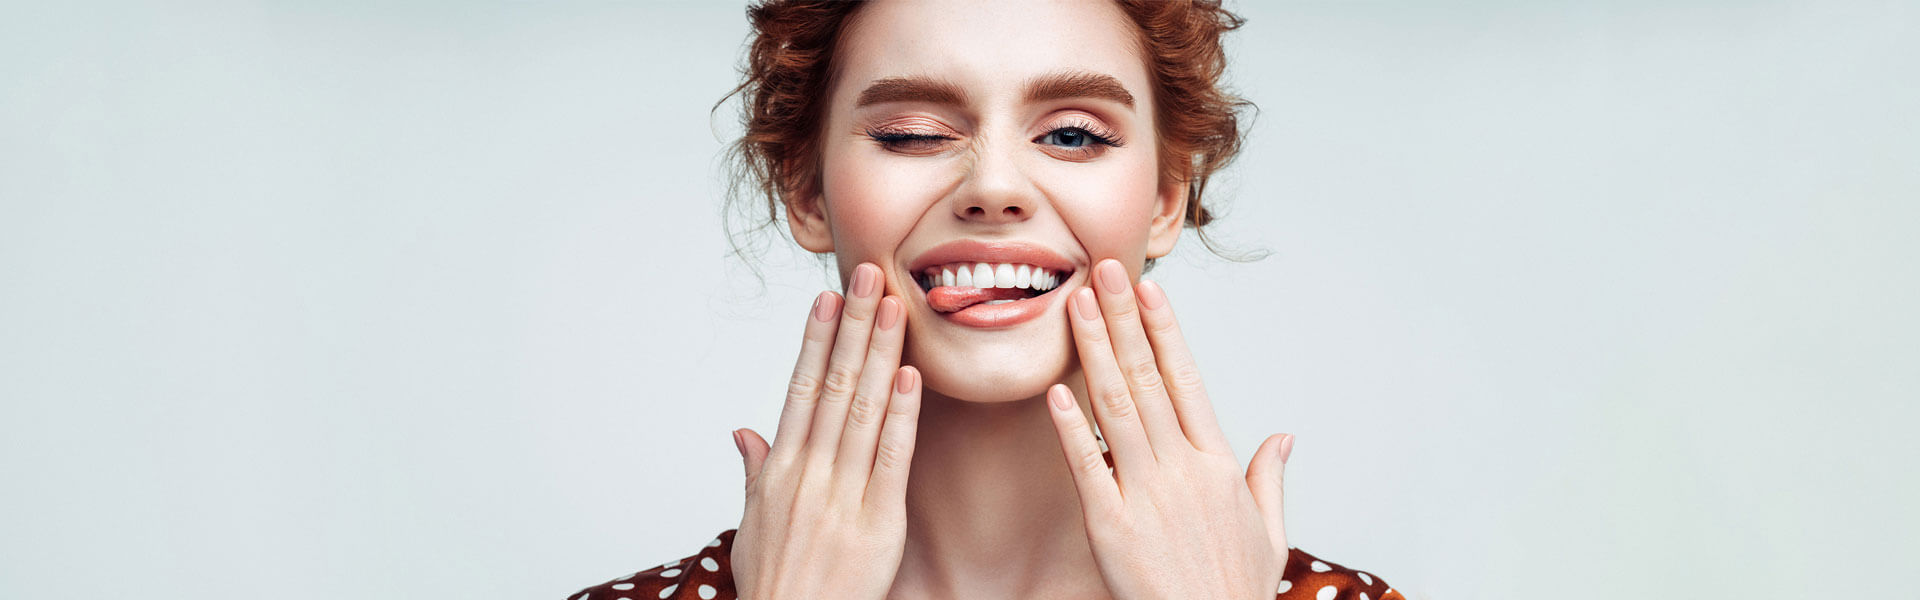 What Are the Most Commonly Asked Questions about a Smile Makeover?